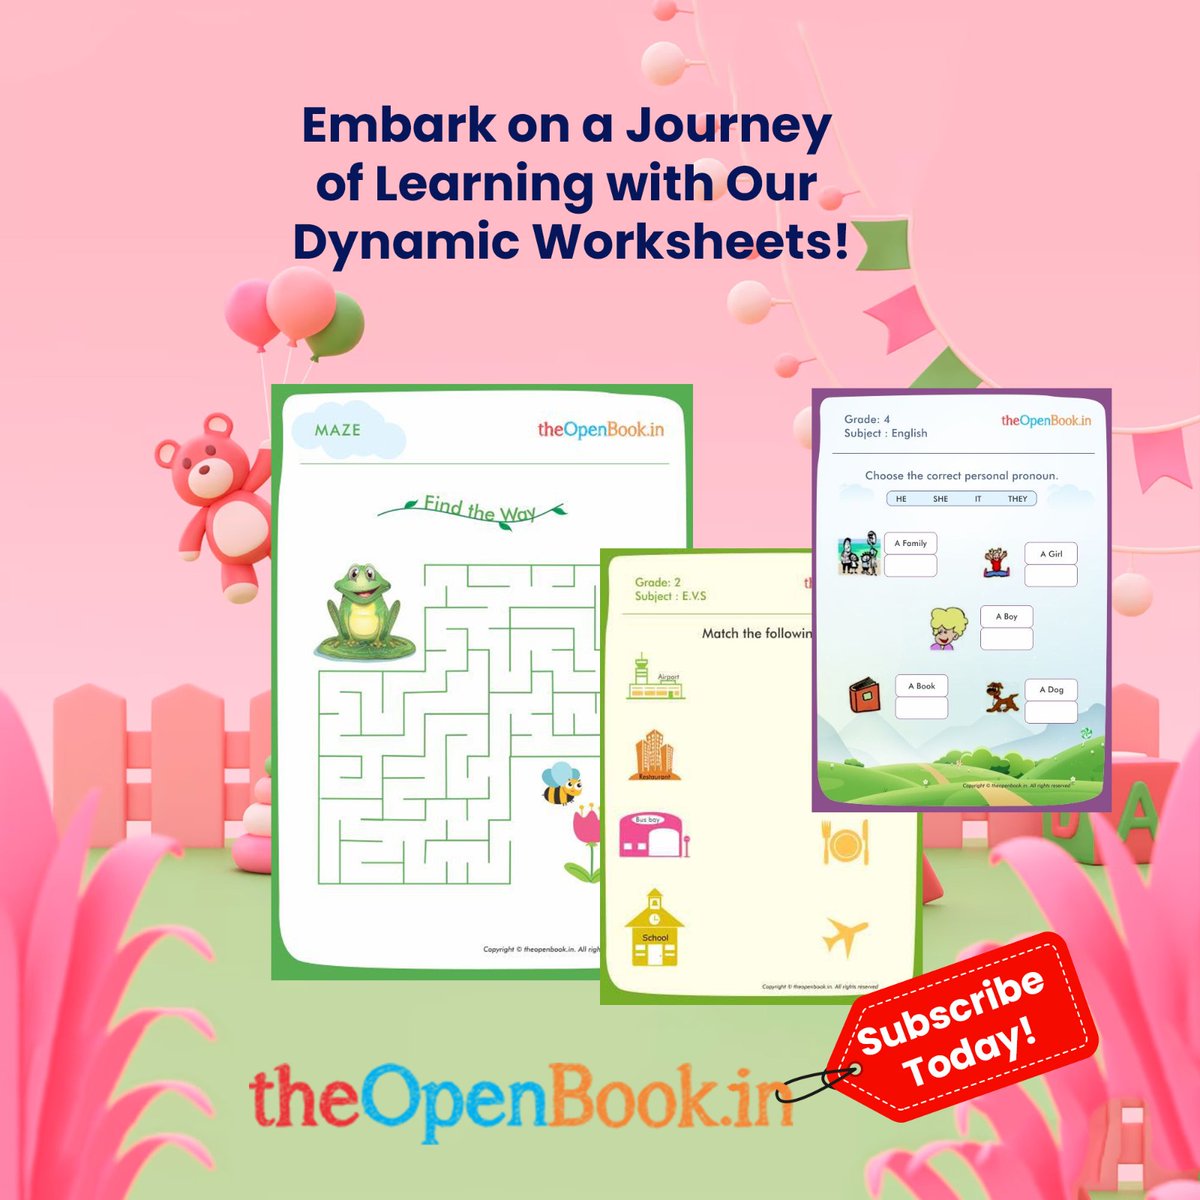 'Empower your child's imagination with hands-on activities and engaging content. Start the creativity journey now!'
Signup Now: theopenbook.in/signin
#OnlineLearning #KidsActivities #EducationalFun 🚀📝 #OnlineWorksheets #ElearningResources #VirtualLearning #DigitalEducation